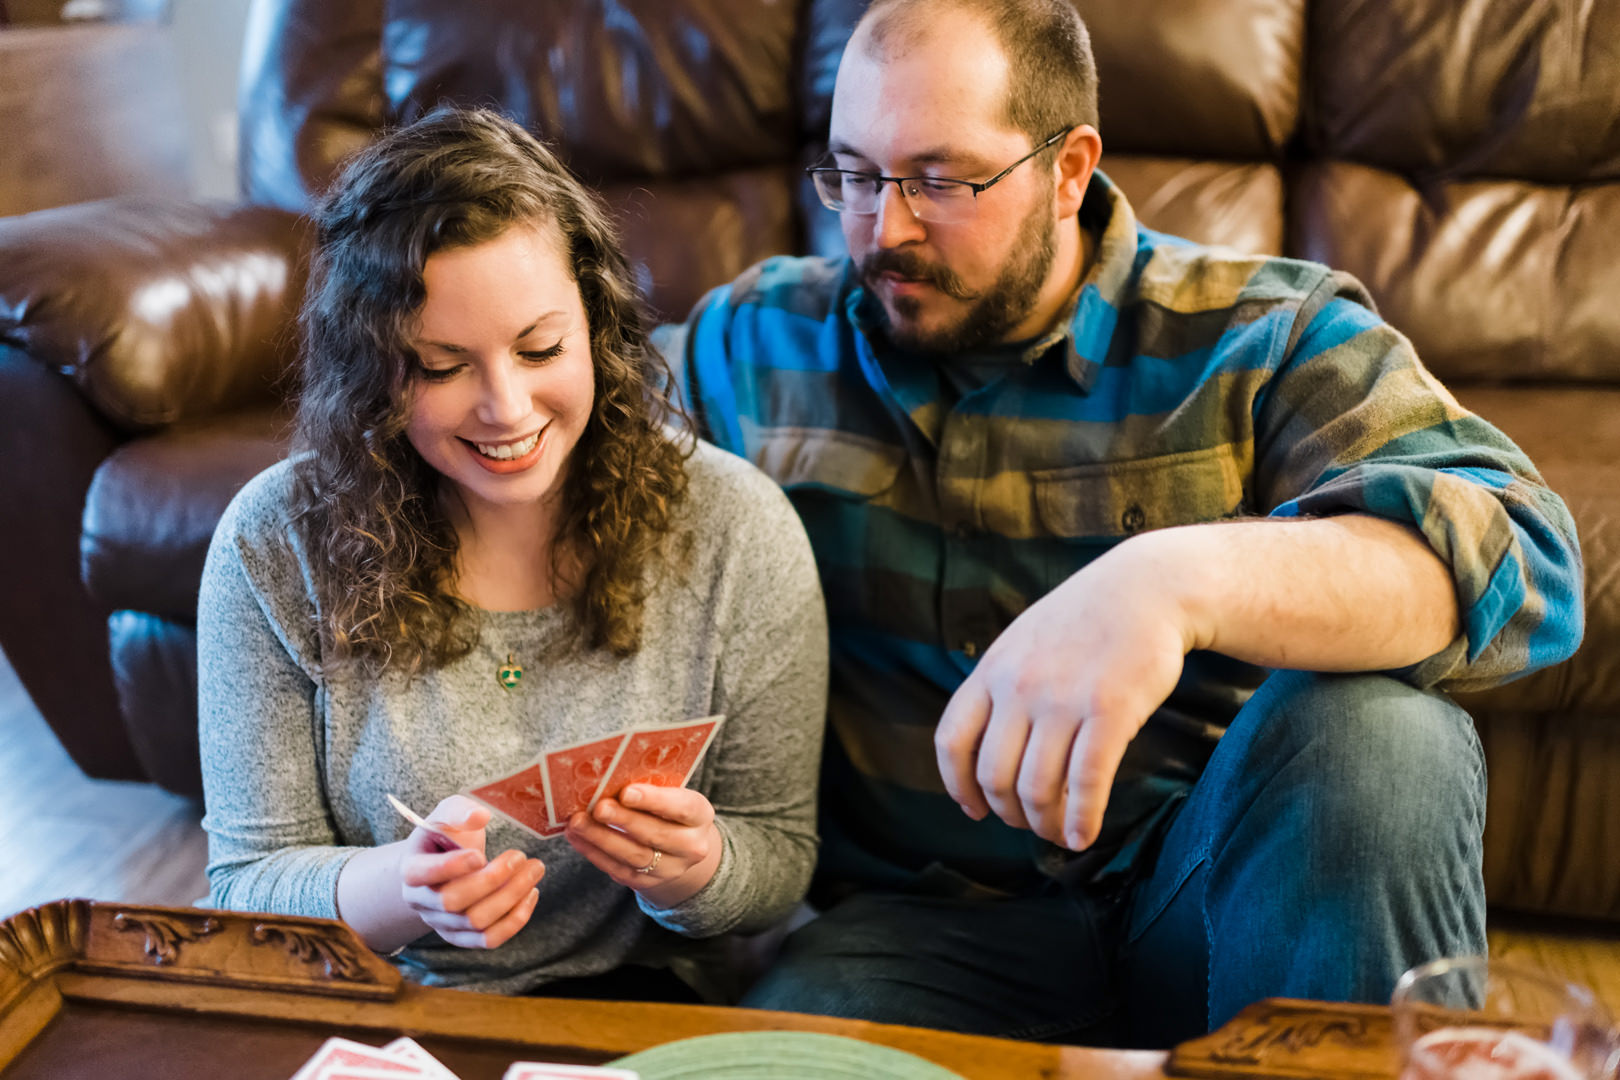 Woman smiles at her good cribbage hand